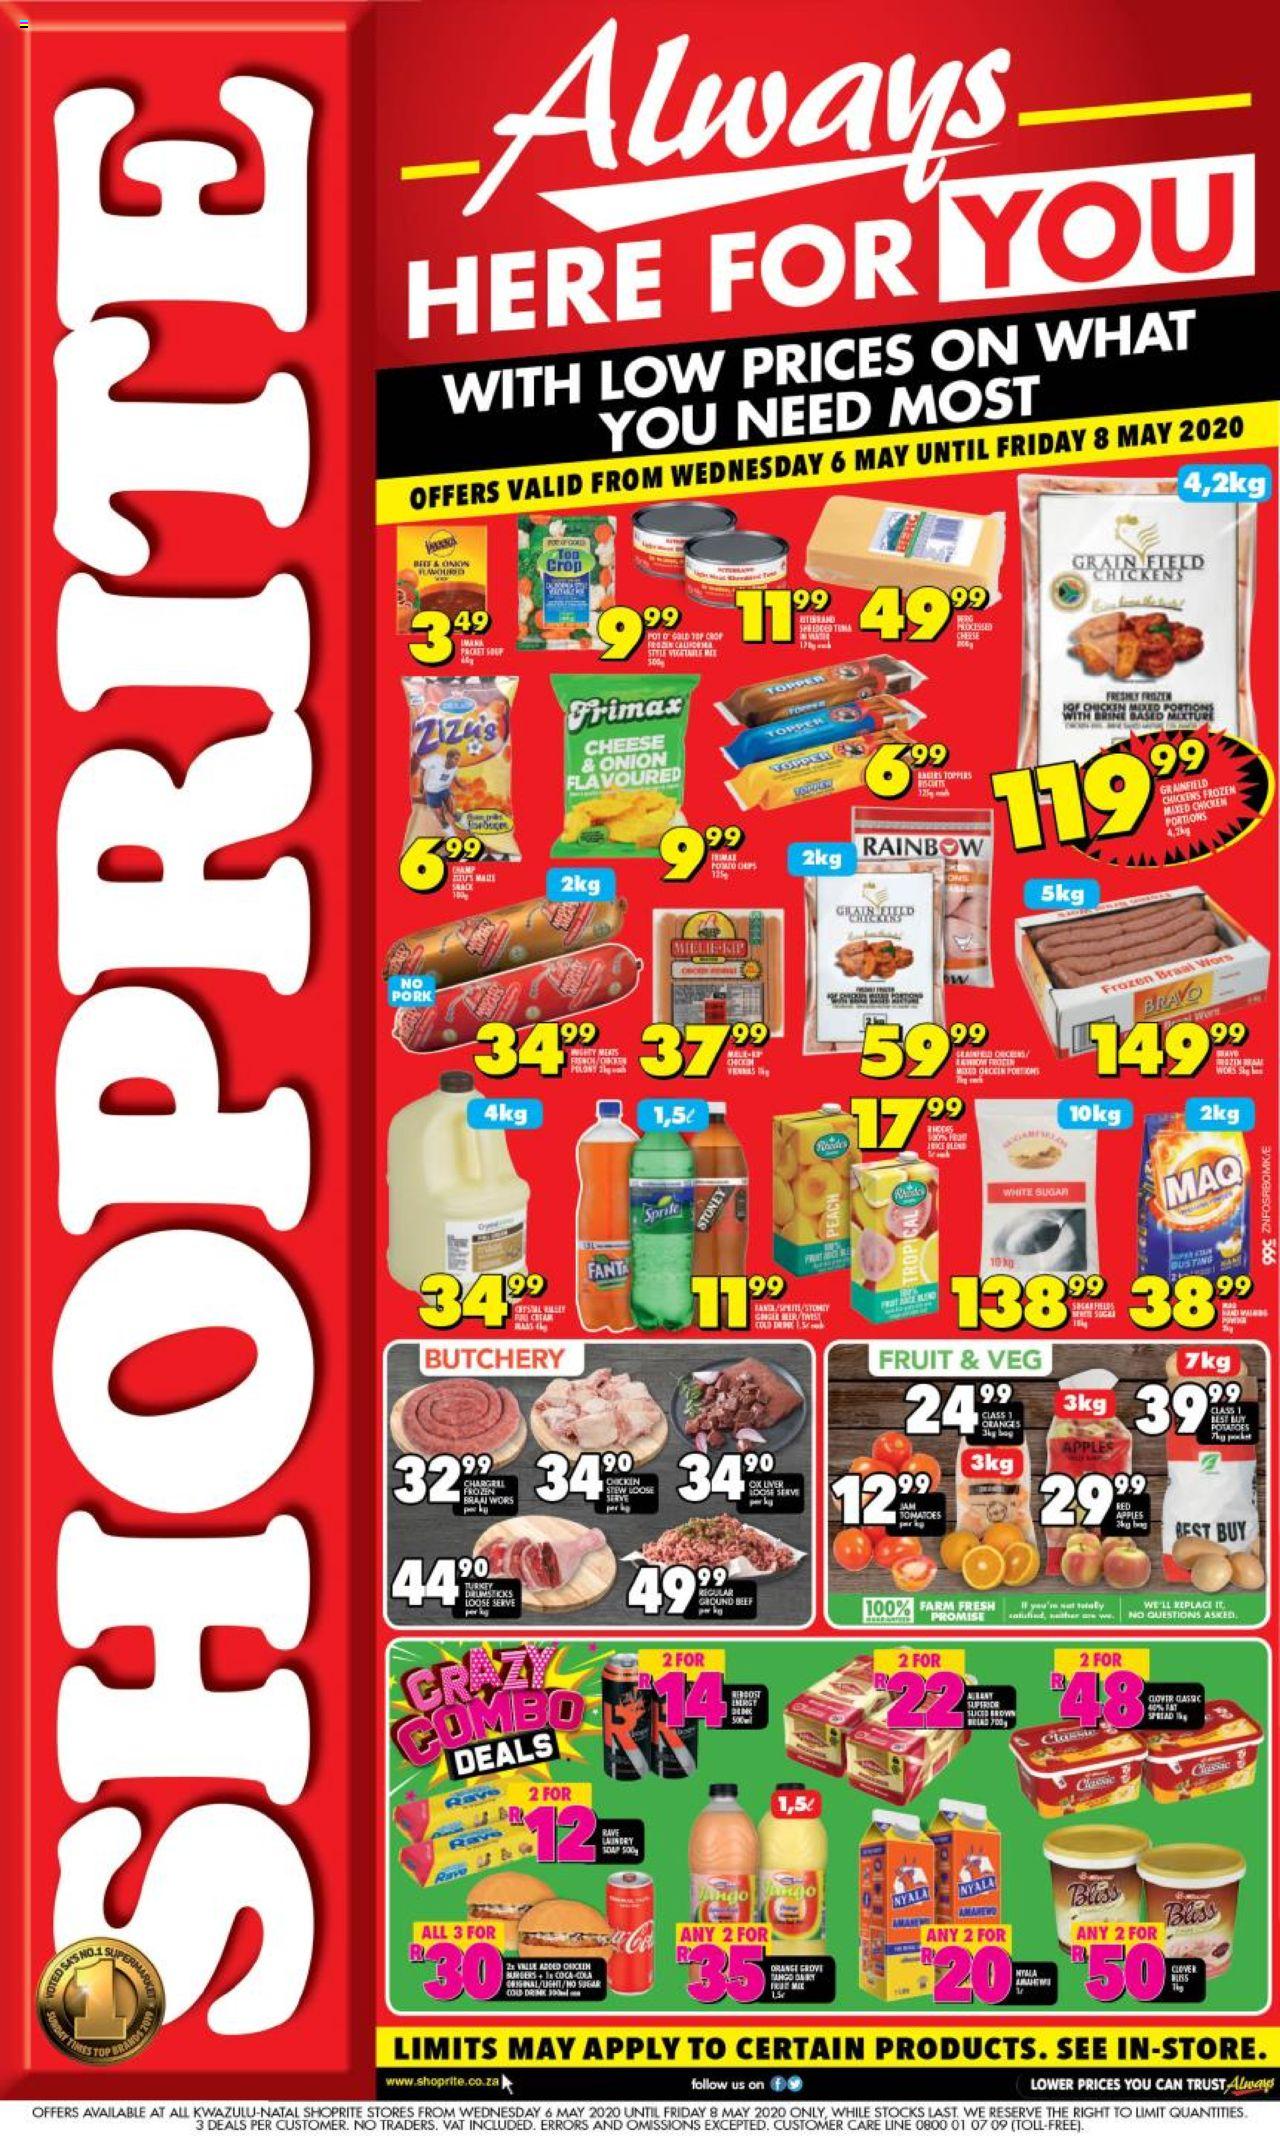 Shoprite Specials Always Here For You 6 May 2020